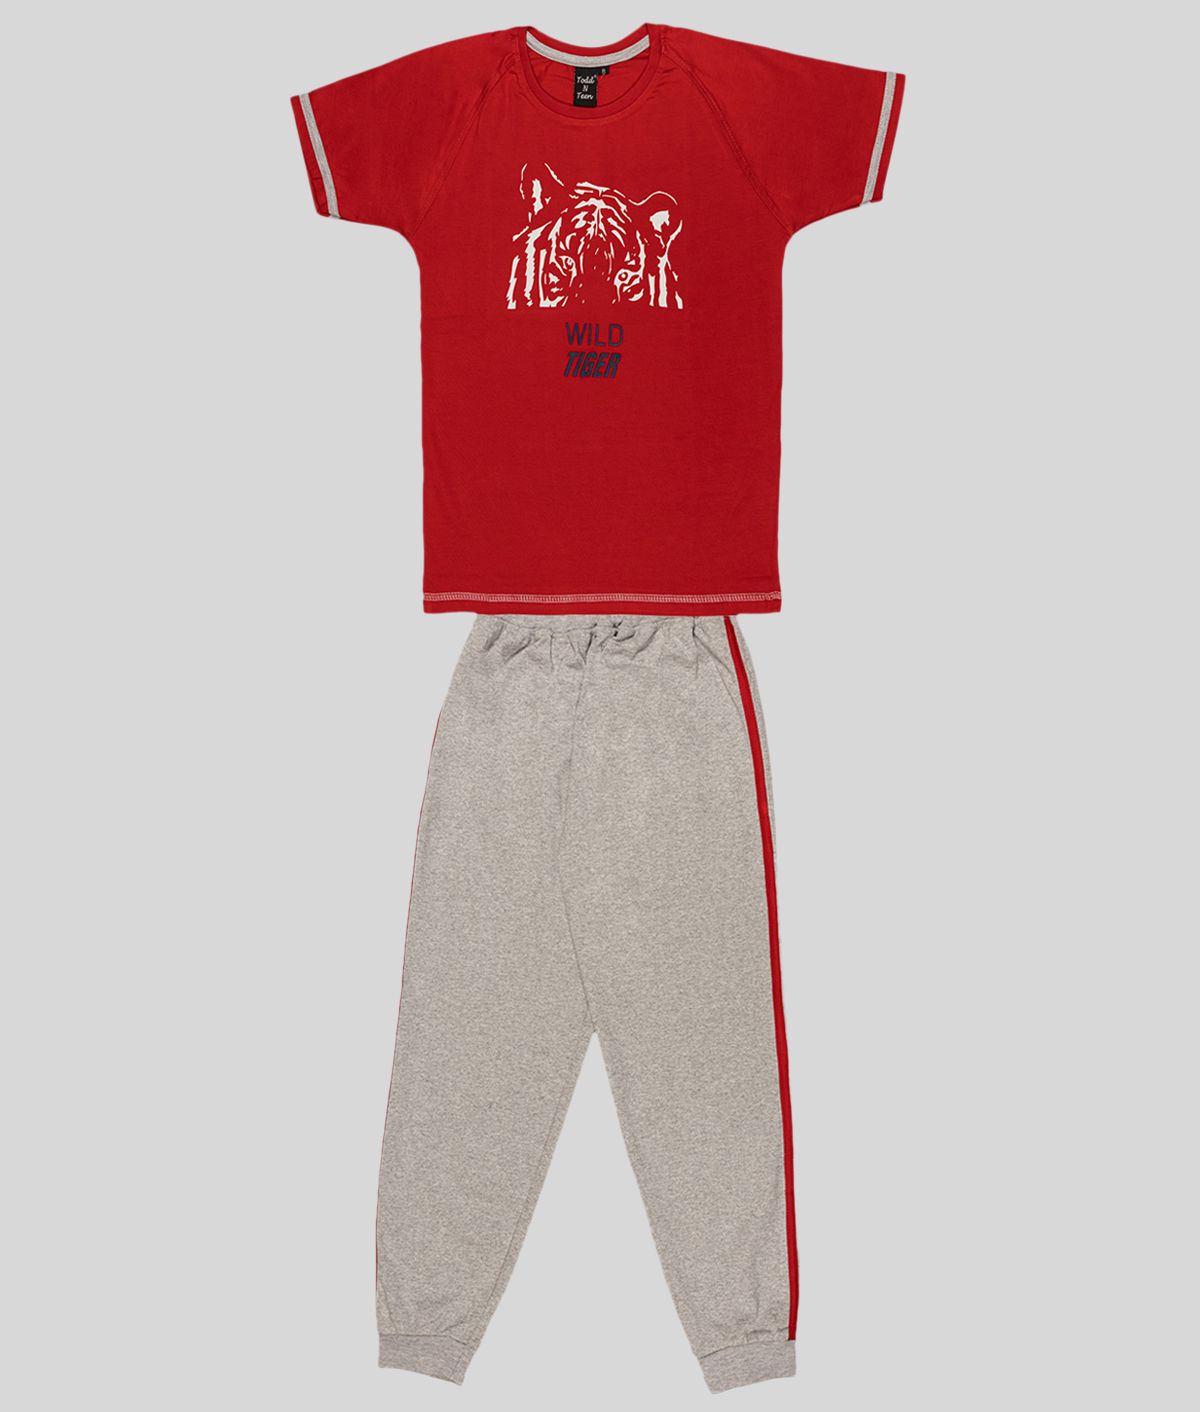     			Todd N Teen - Red Cotton Boy's T-Shirt & Pants ( Pack of 1 )